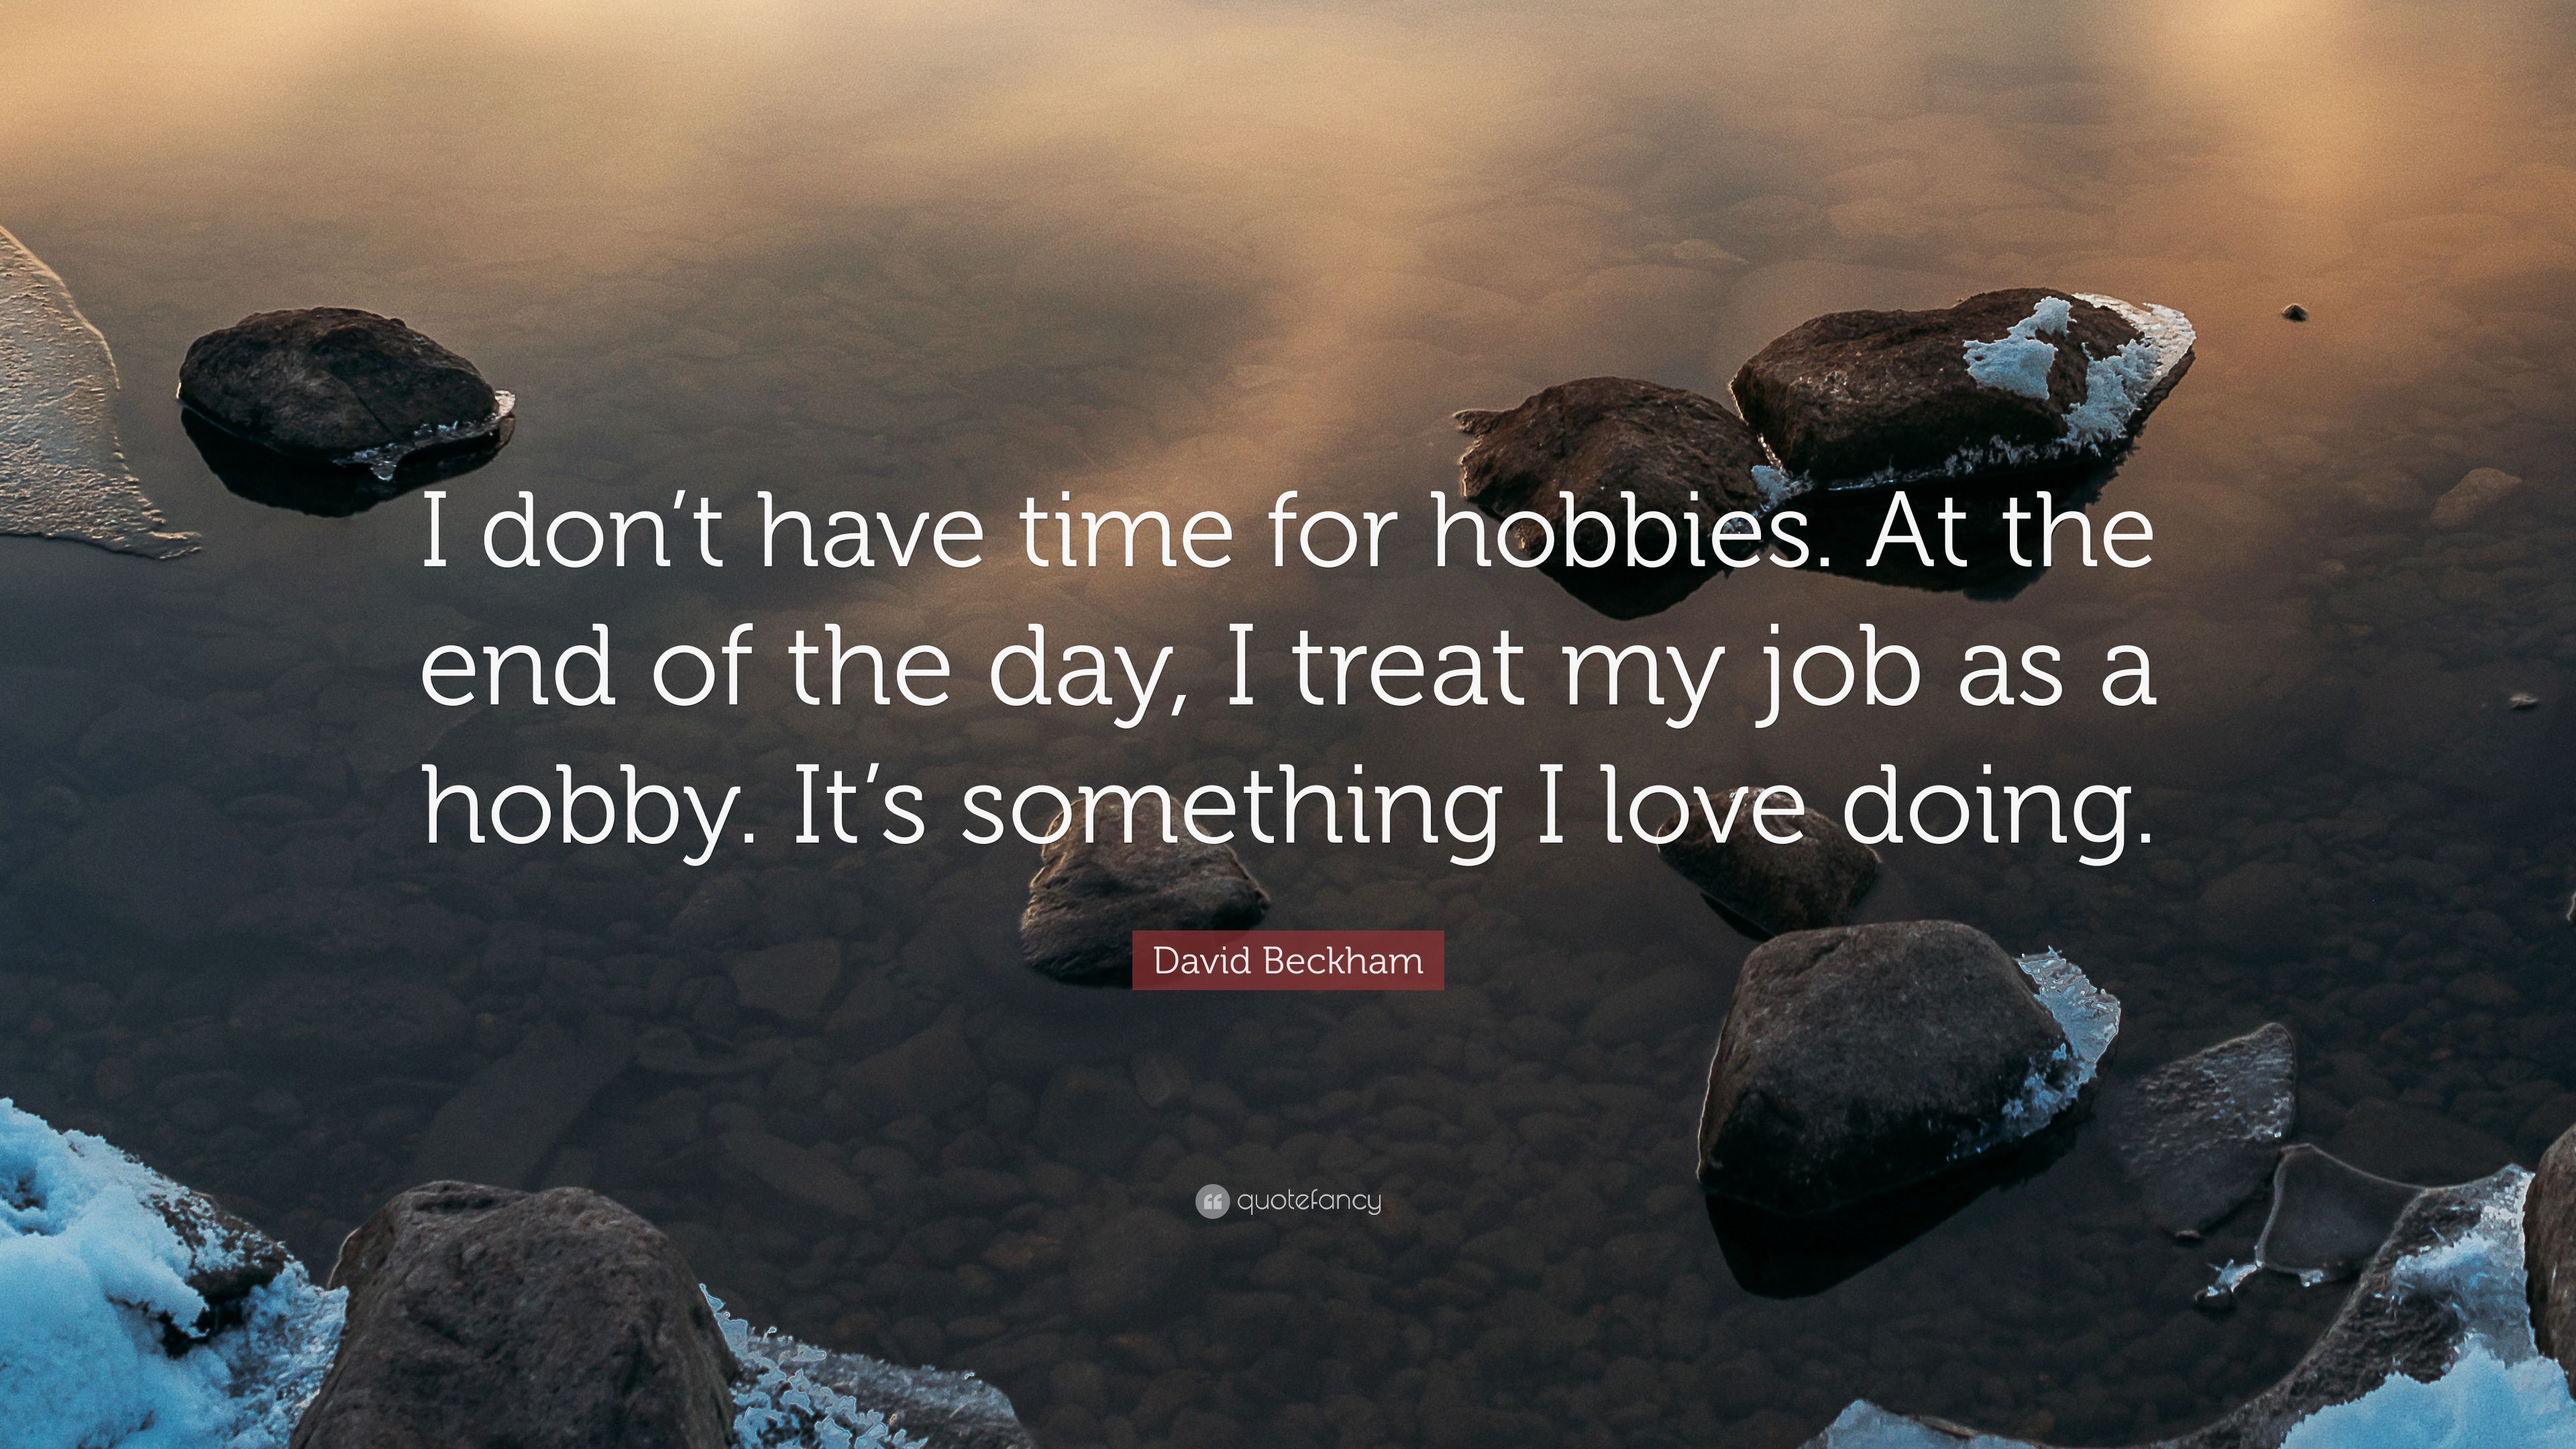 David Beckham Quote: “I don't have time for hobbies. At